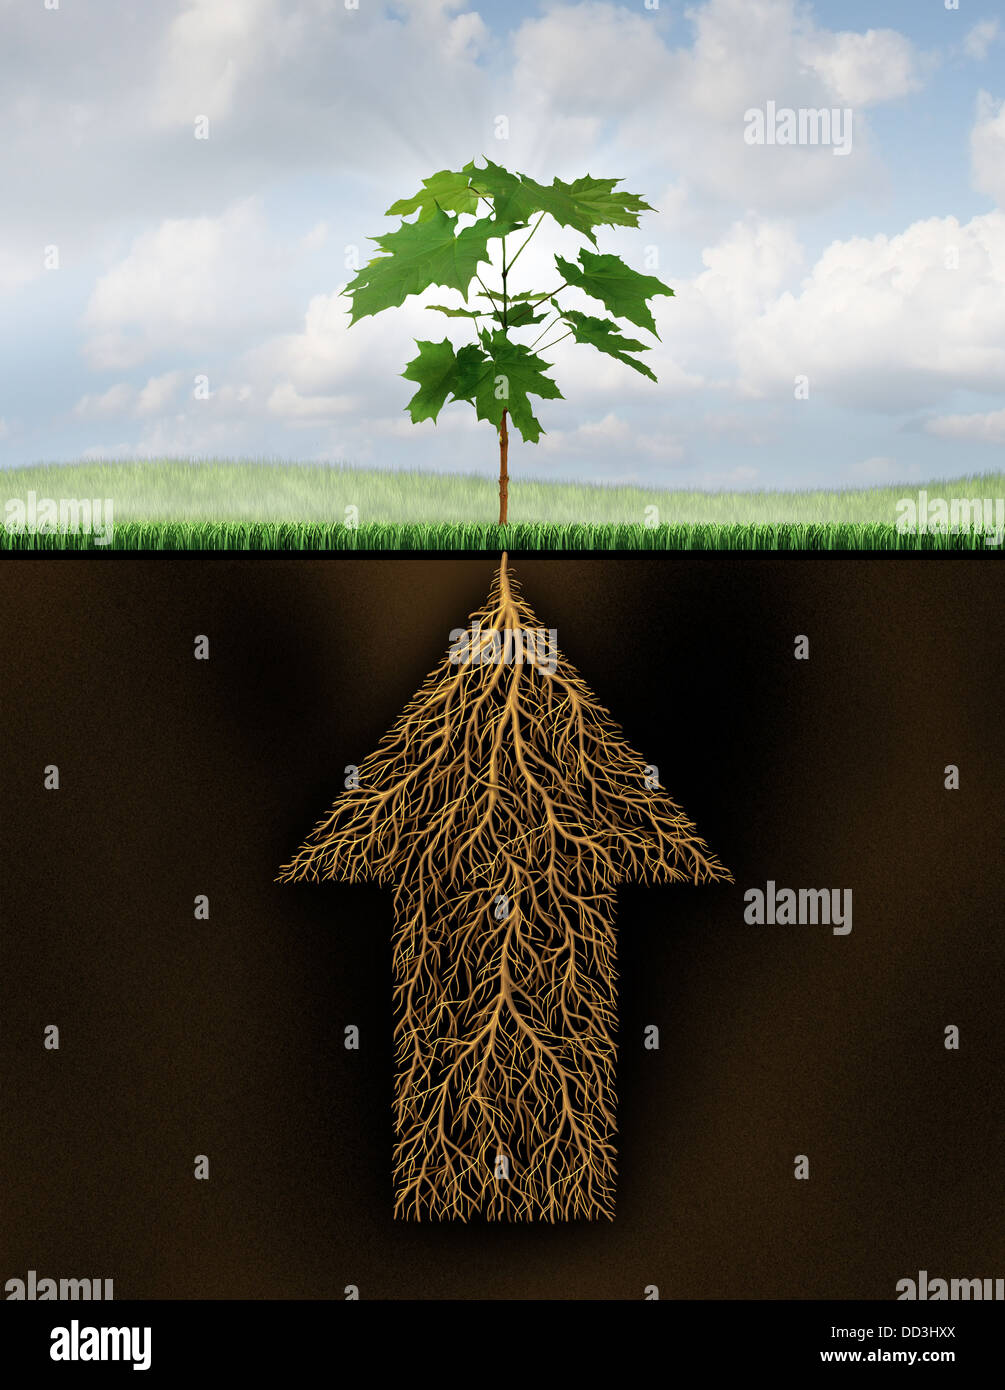 Root of success as a growth business concept with a new sprouting tree emerging from underground roots shaped as an arrow that is going up as a financial symbol of future investment potential. Stock Photo